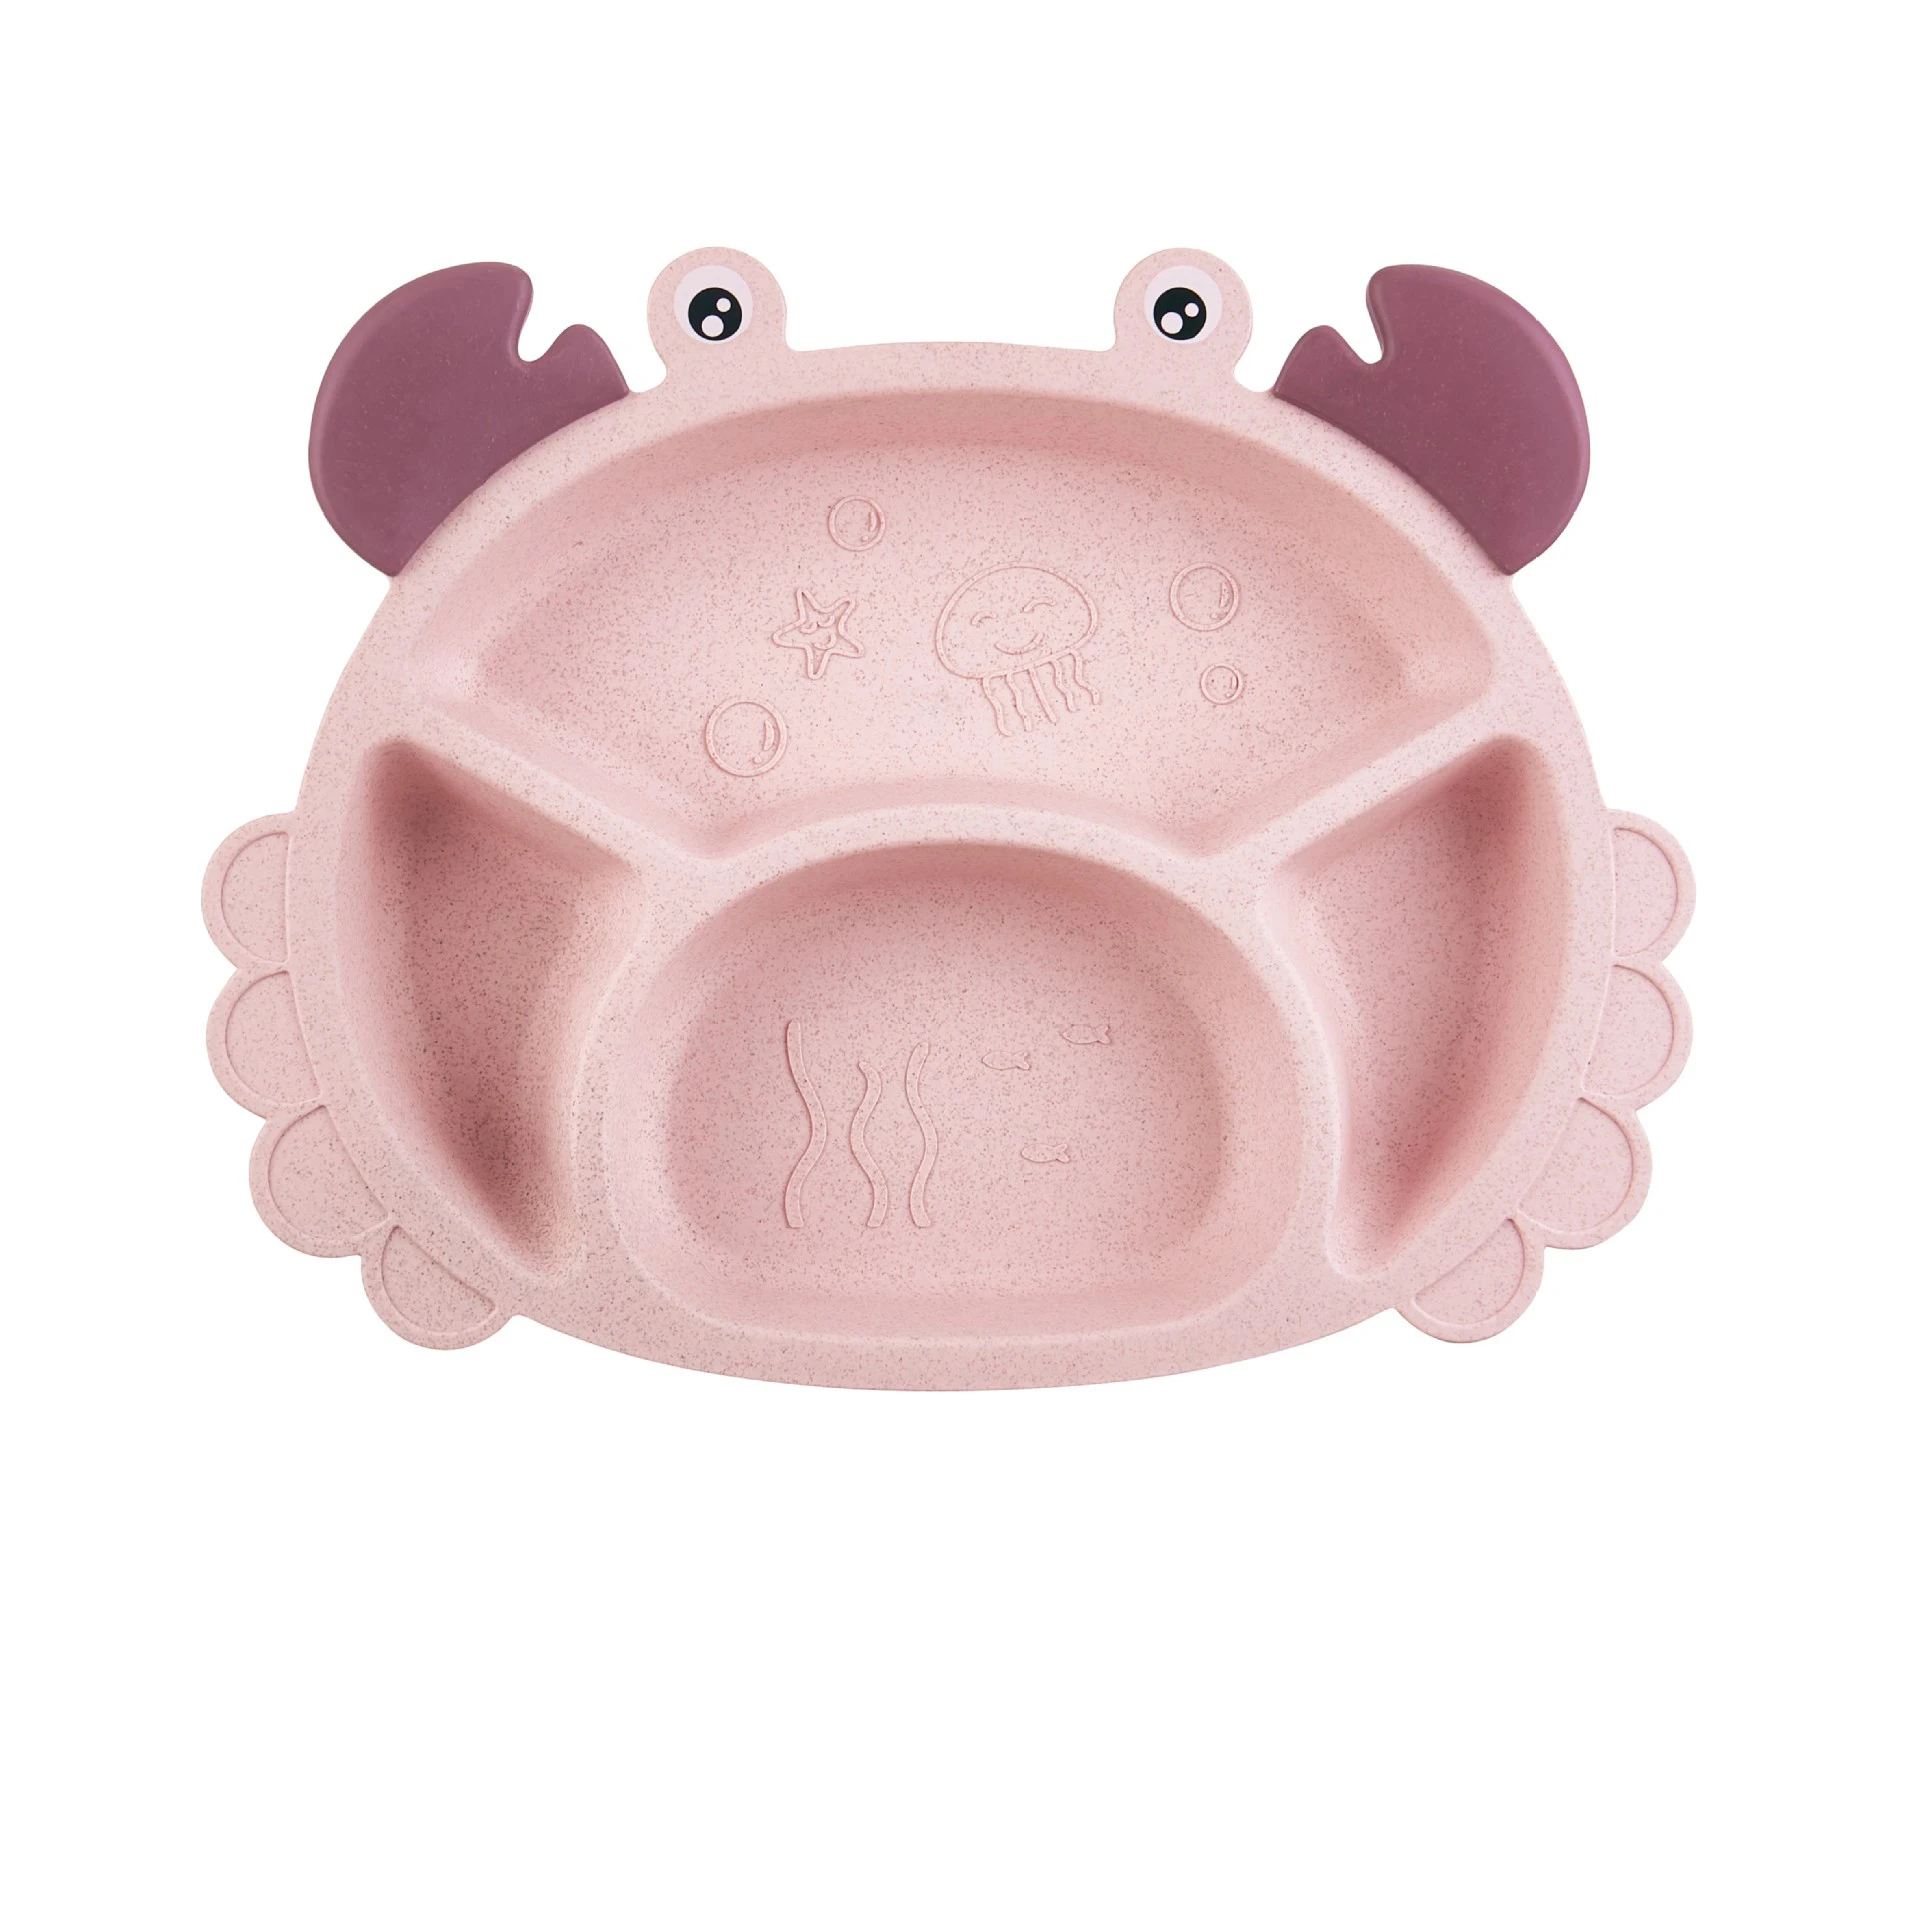 

Wholesale 3pcs crab shape children bamboo fiber dinnerware sets kids tableware sets with plates bowls cups, Picture